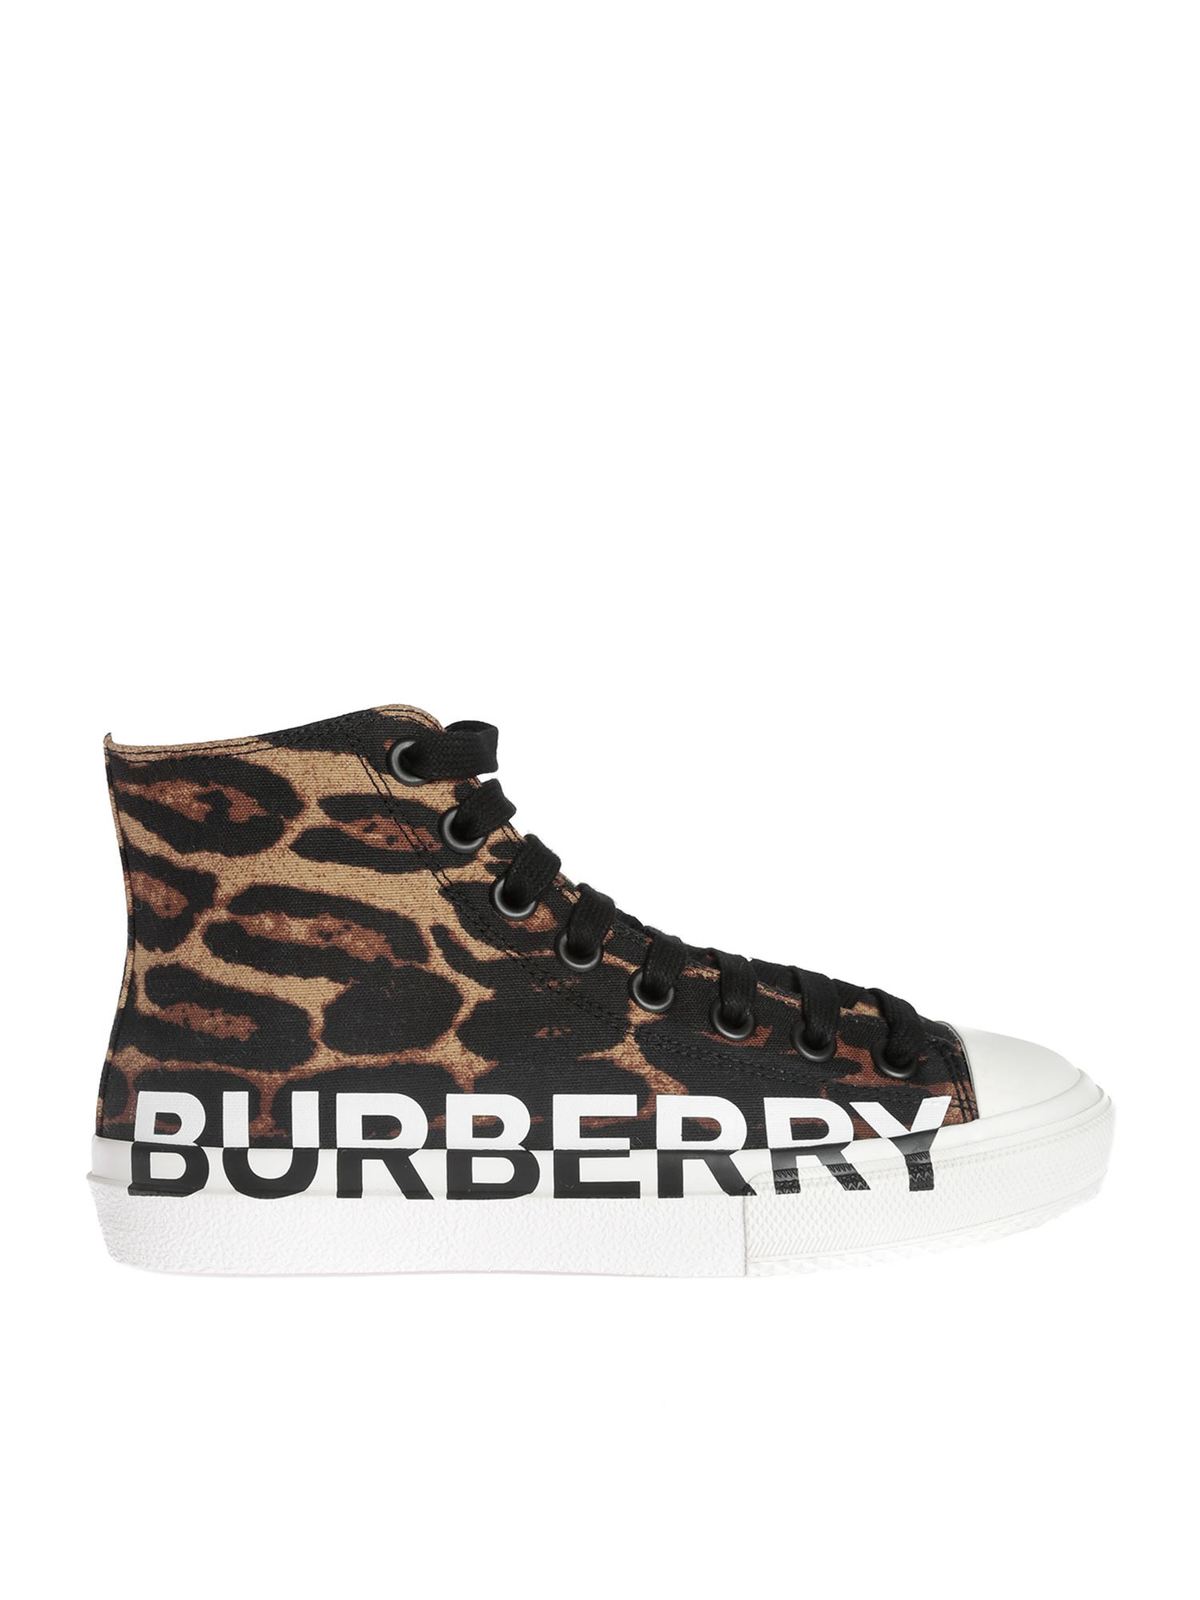 Embrace the Wild Side: Burberry Leopard Sneakers